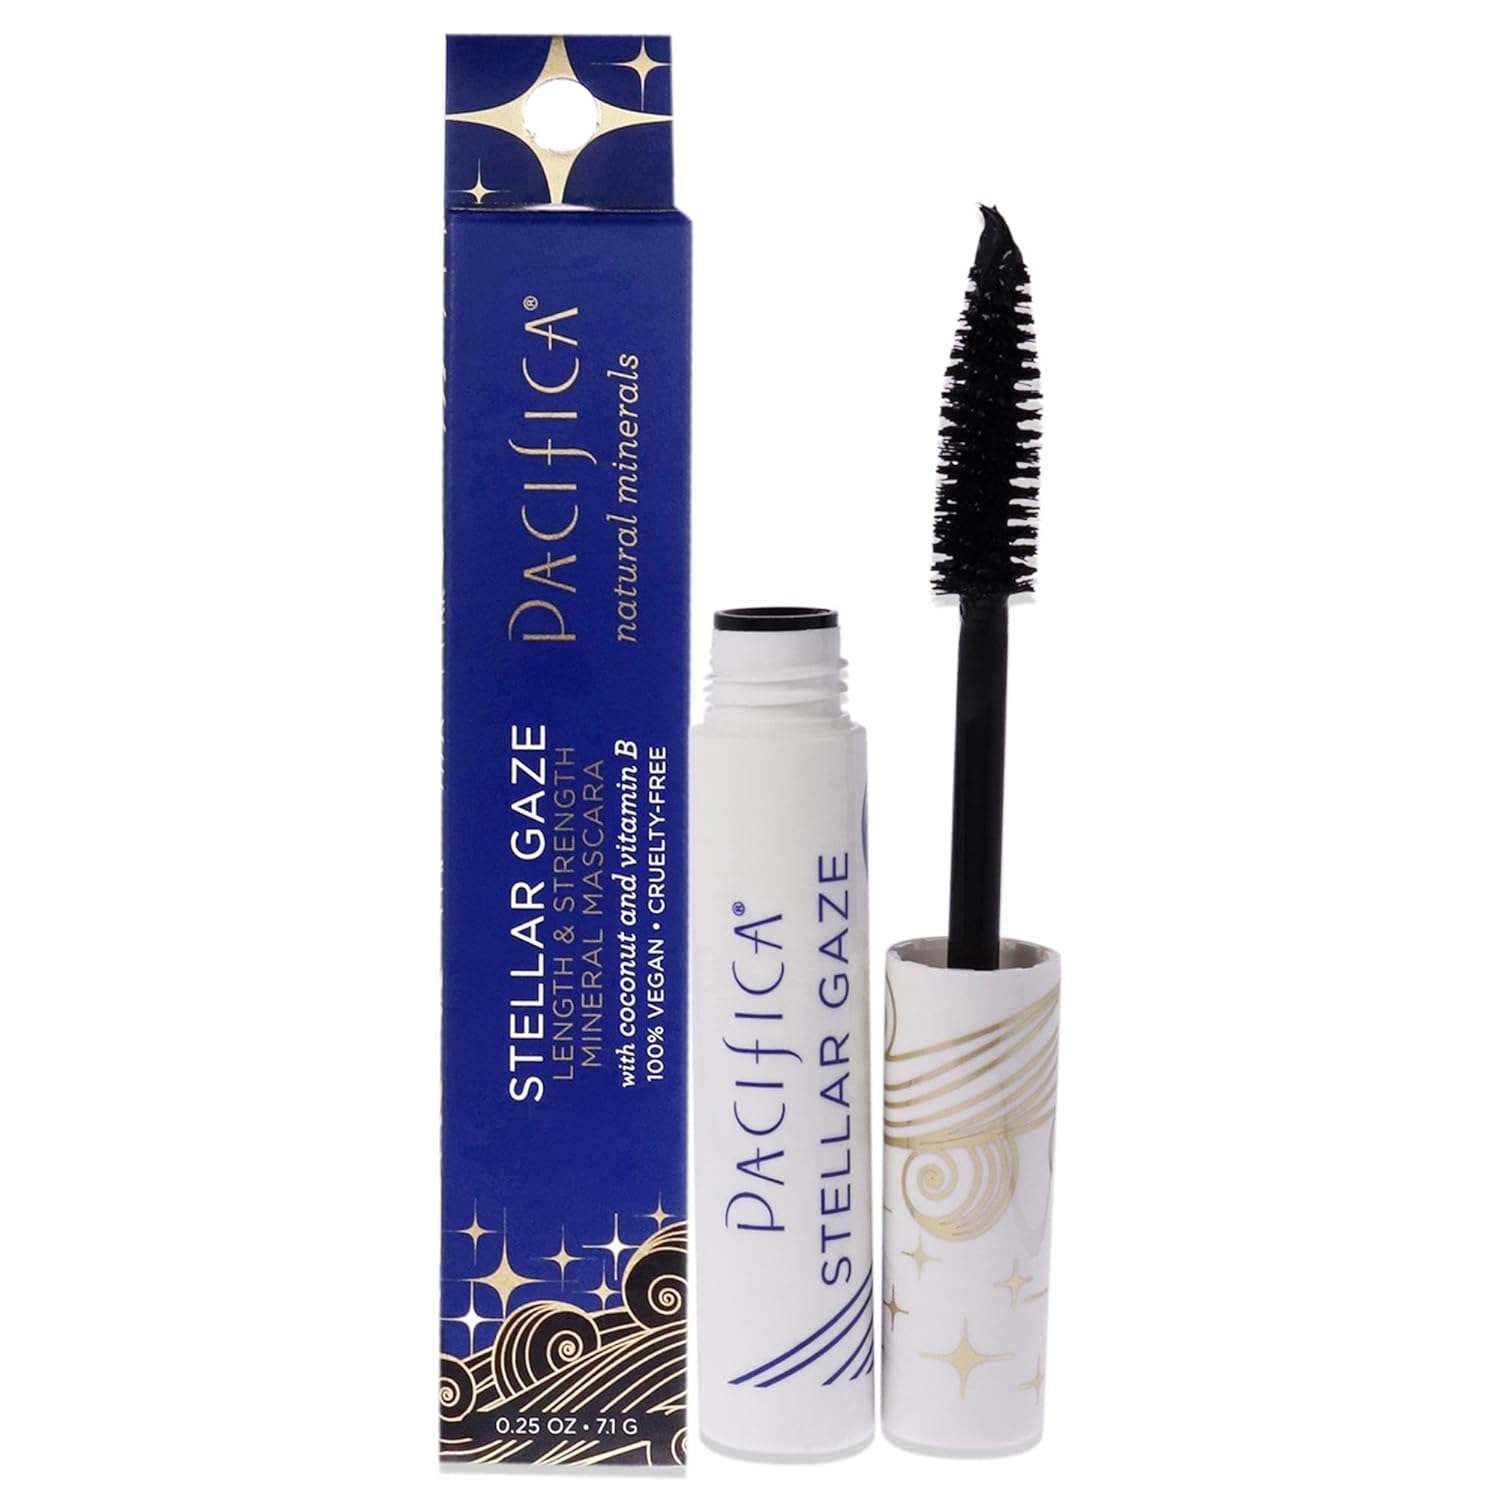 Pacifica Beauty, Stellar Gaze Length & Strength Black Mascara, For Volume and Length, Vitamin B + Coconut, Natural Lash Effect, Silicone, Sulfate & Paraben Free, Vegan and Cruelty Free